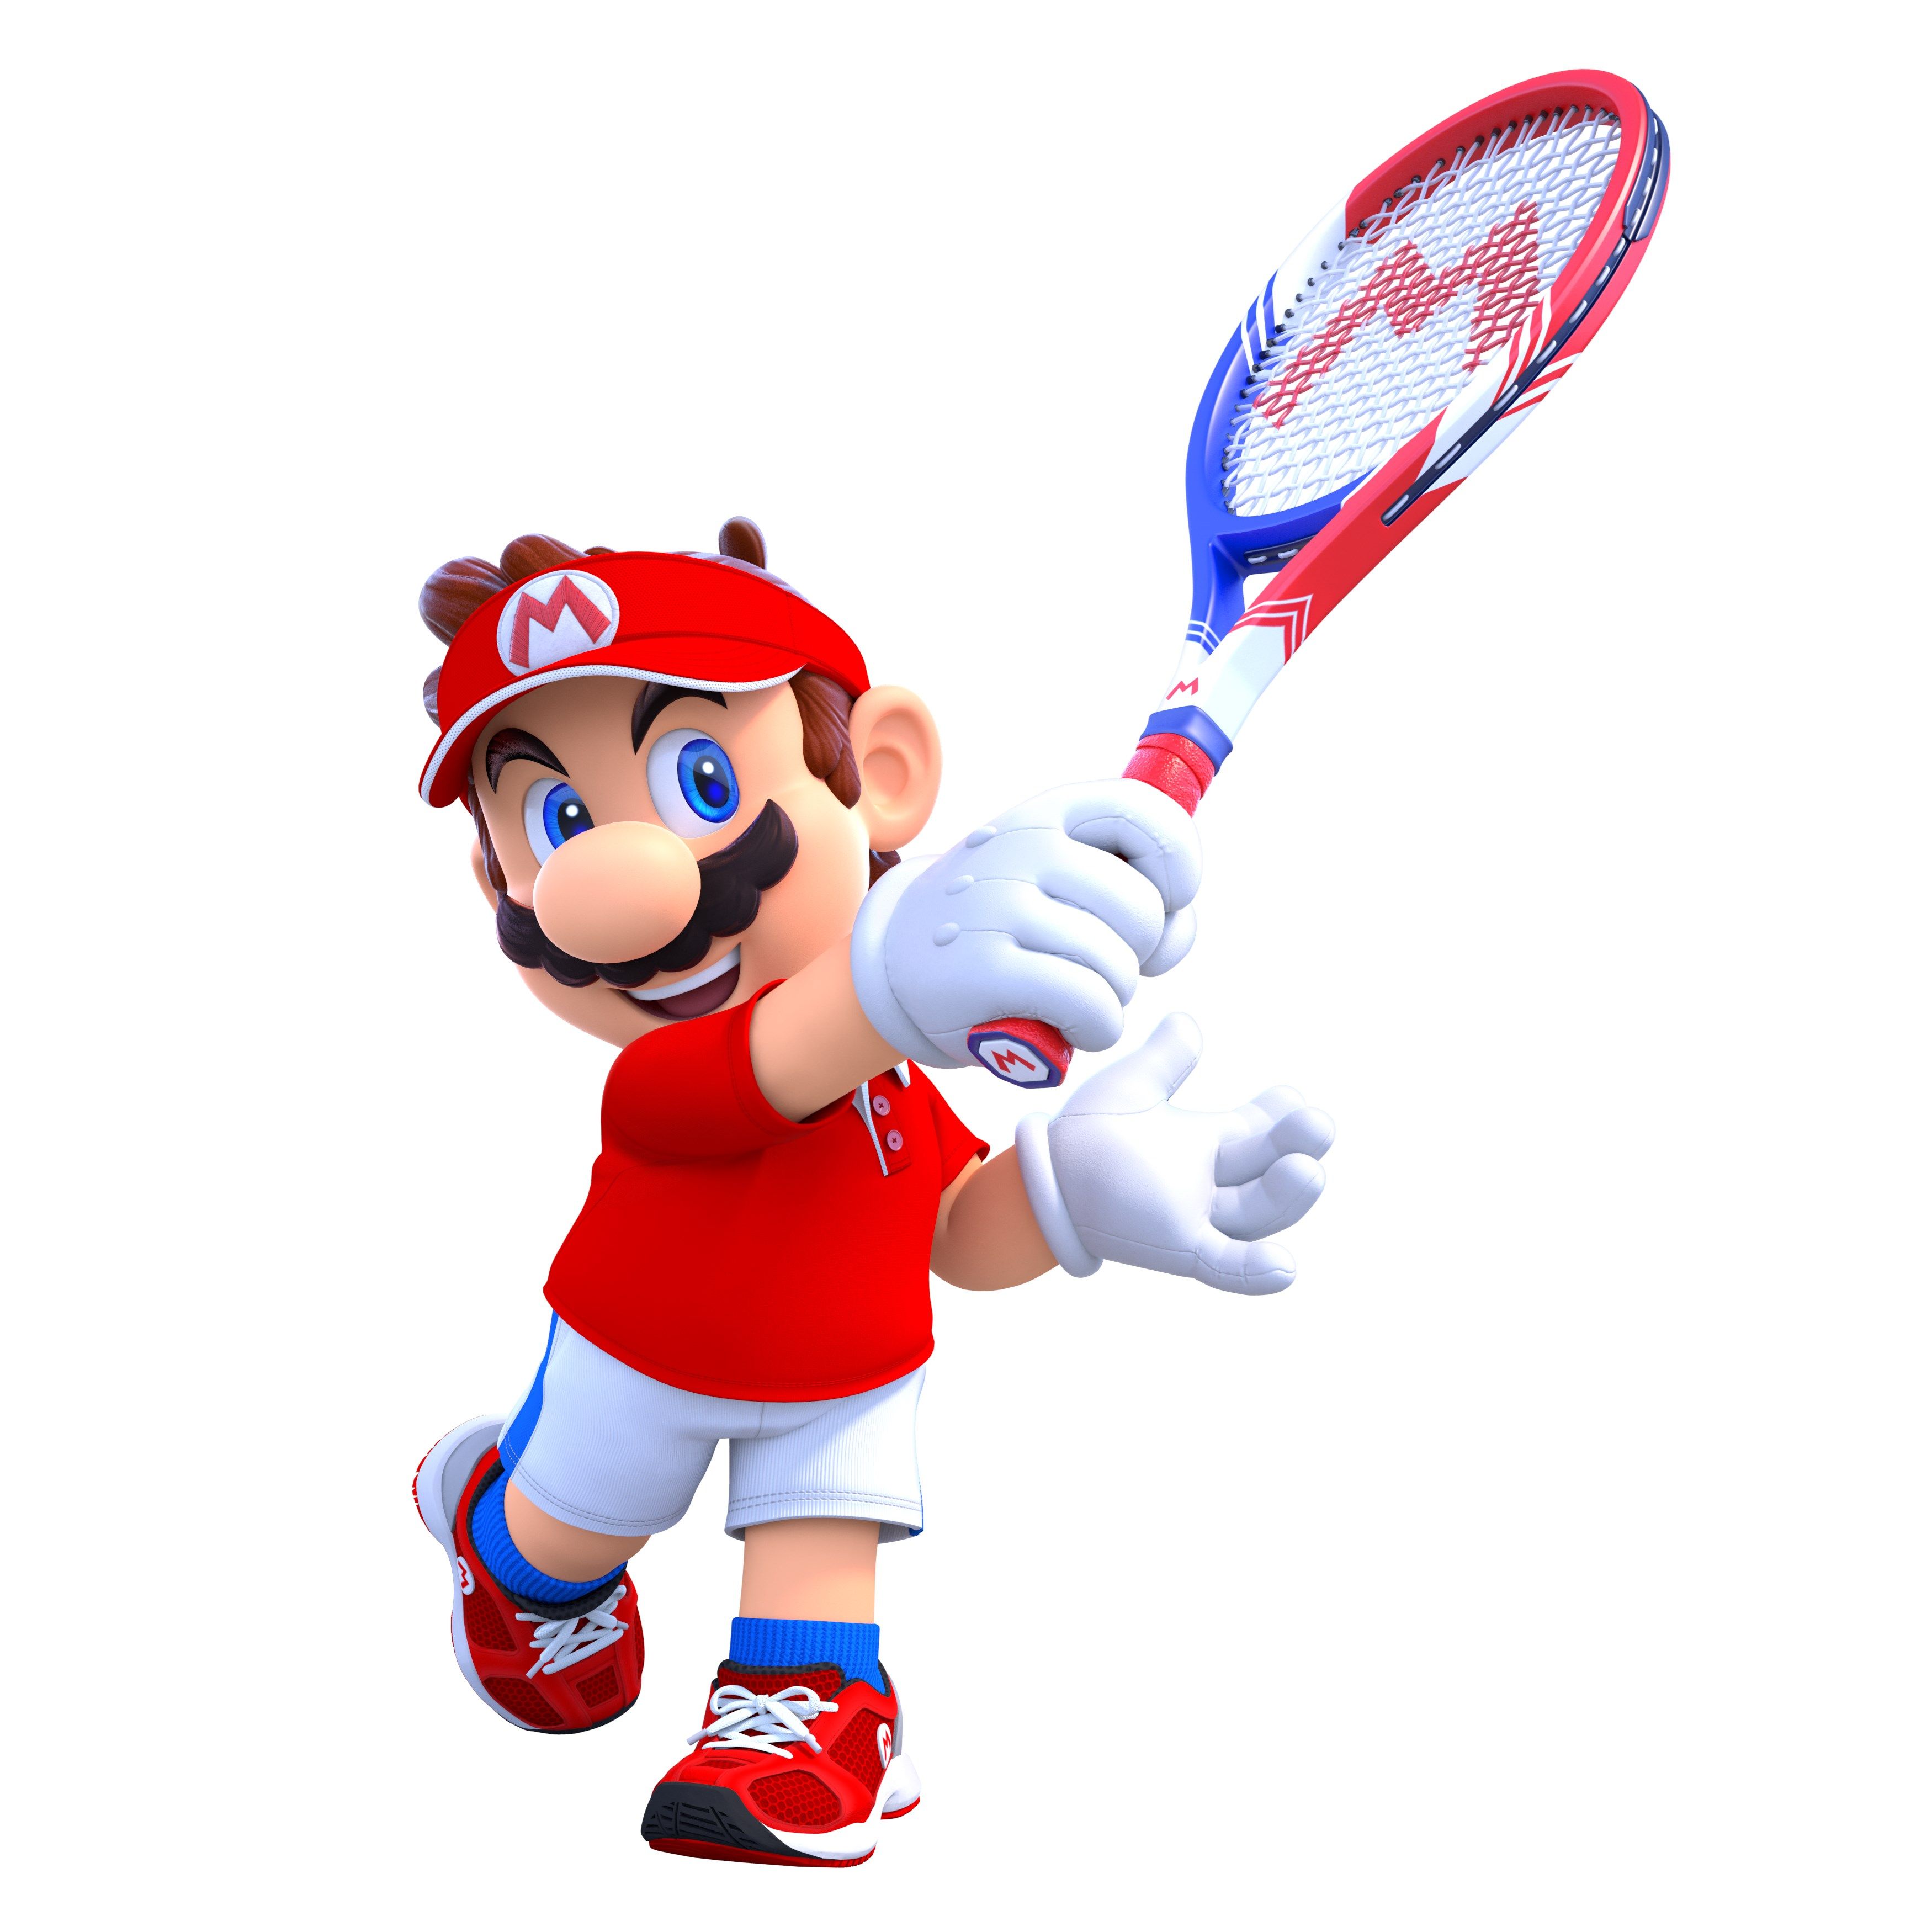 Mario Tennis Aces lots of details, footage, prelaunch online